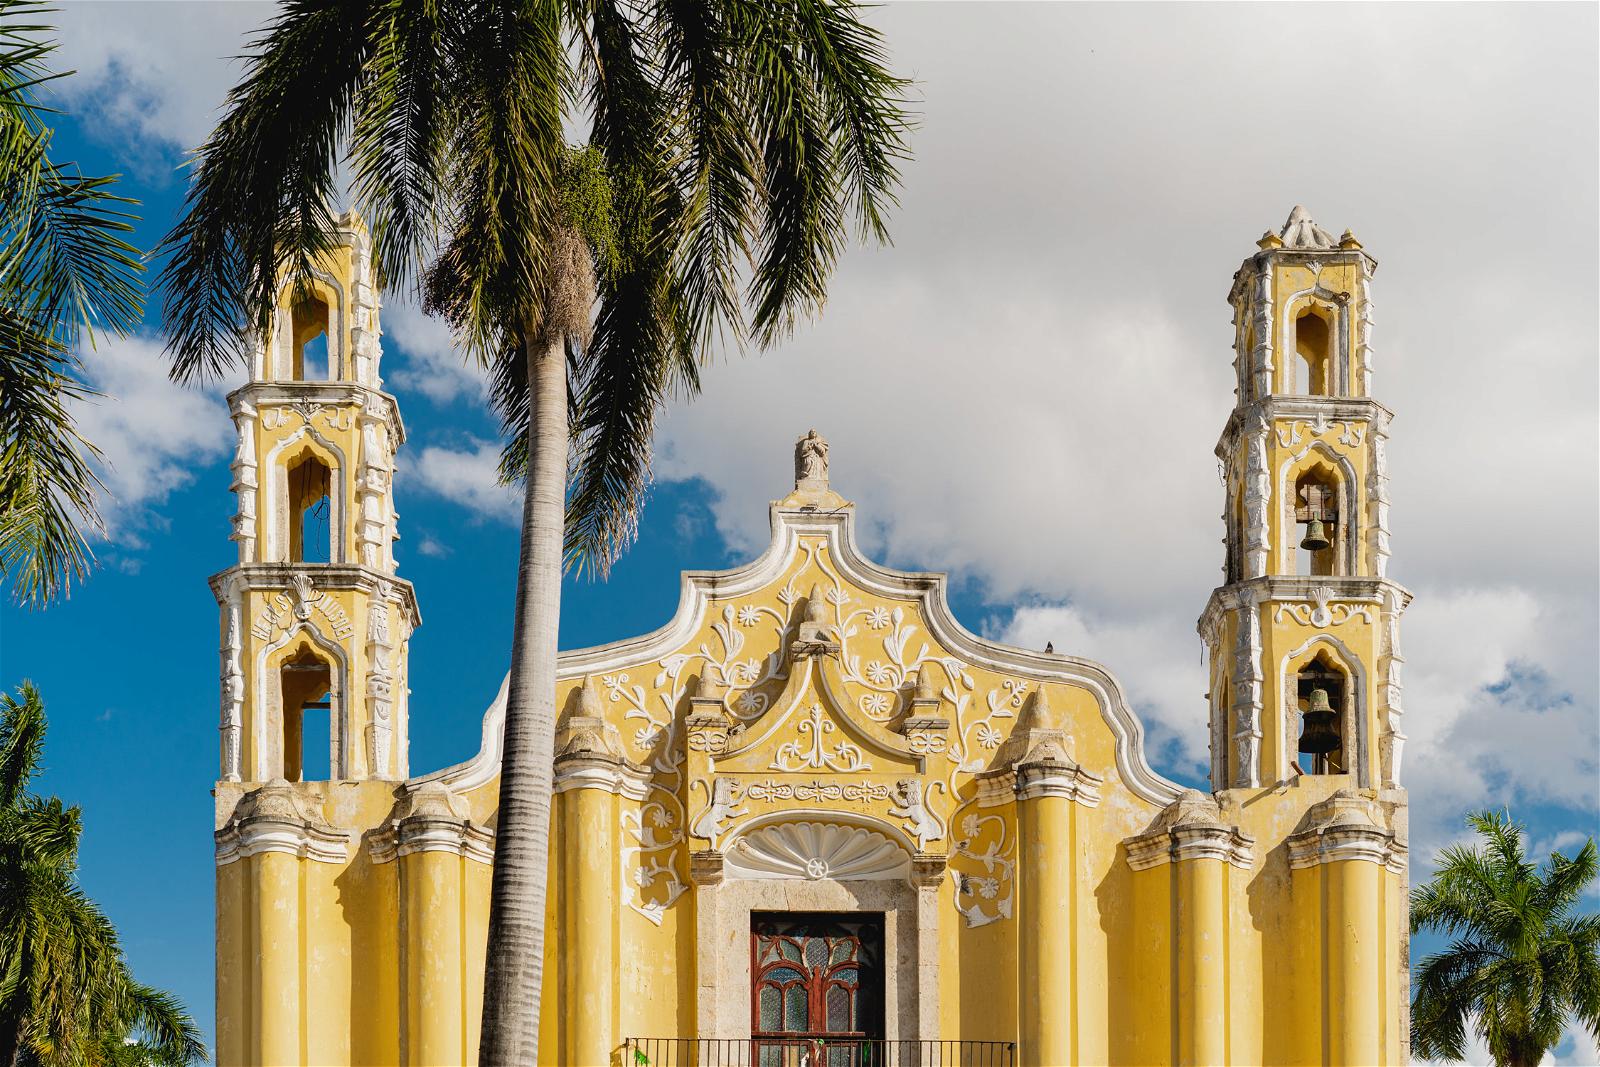 Merida photo gallery: inspiration for your trip